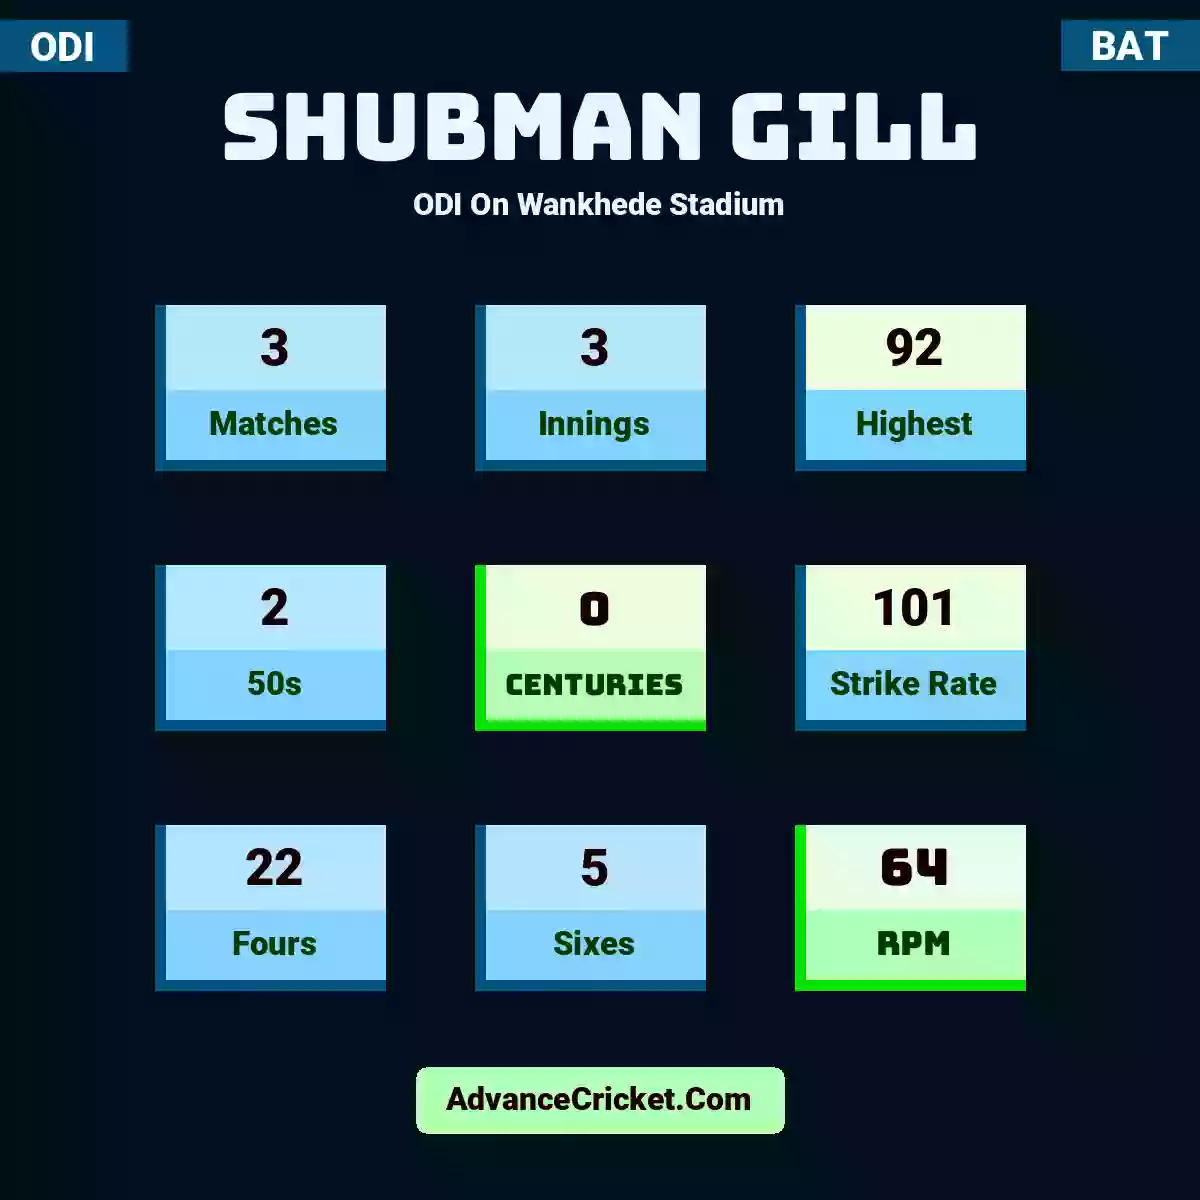 Shubman Gill ODI  On Wankhede Stadium, Shubman Gill played 3 matches, scored 92 runs as highest, 2 half-centuries, and 0 centuries, with a strike rate of 101. S.Gill hit 22 fours and 5 sixes, with an RPM of 64.